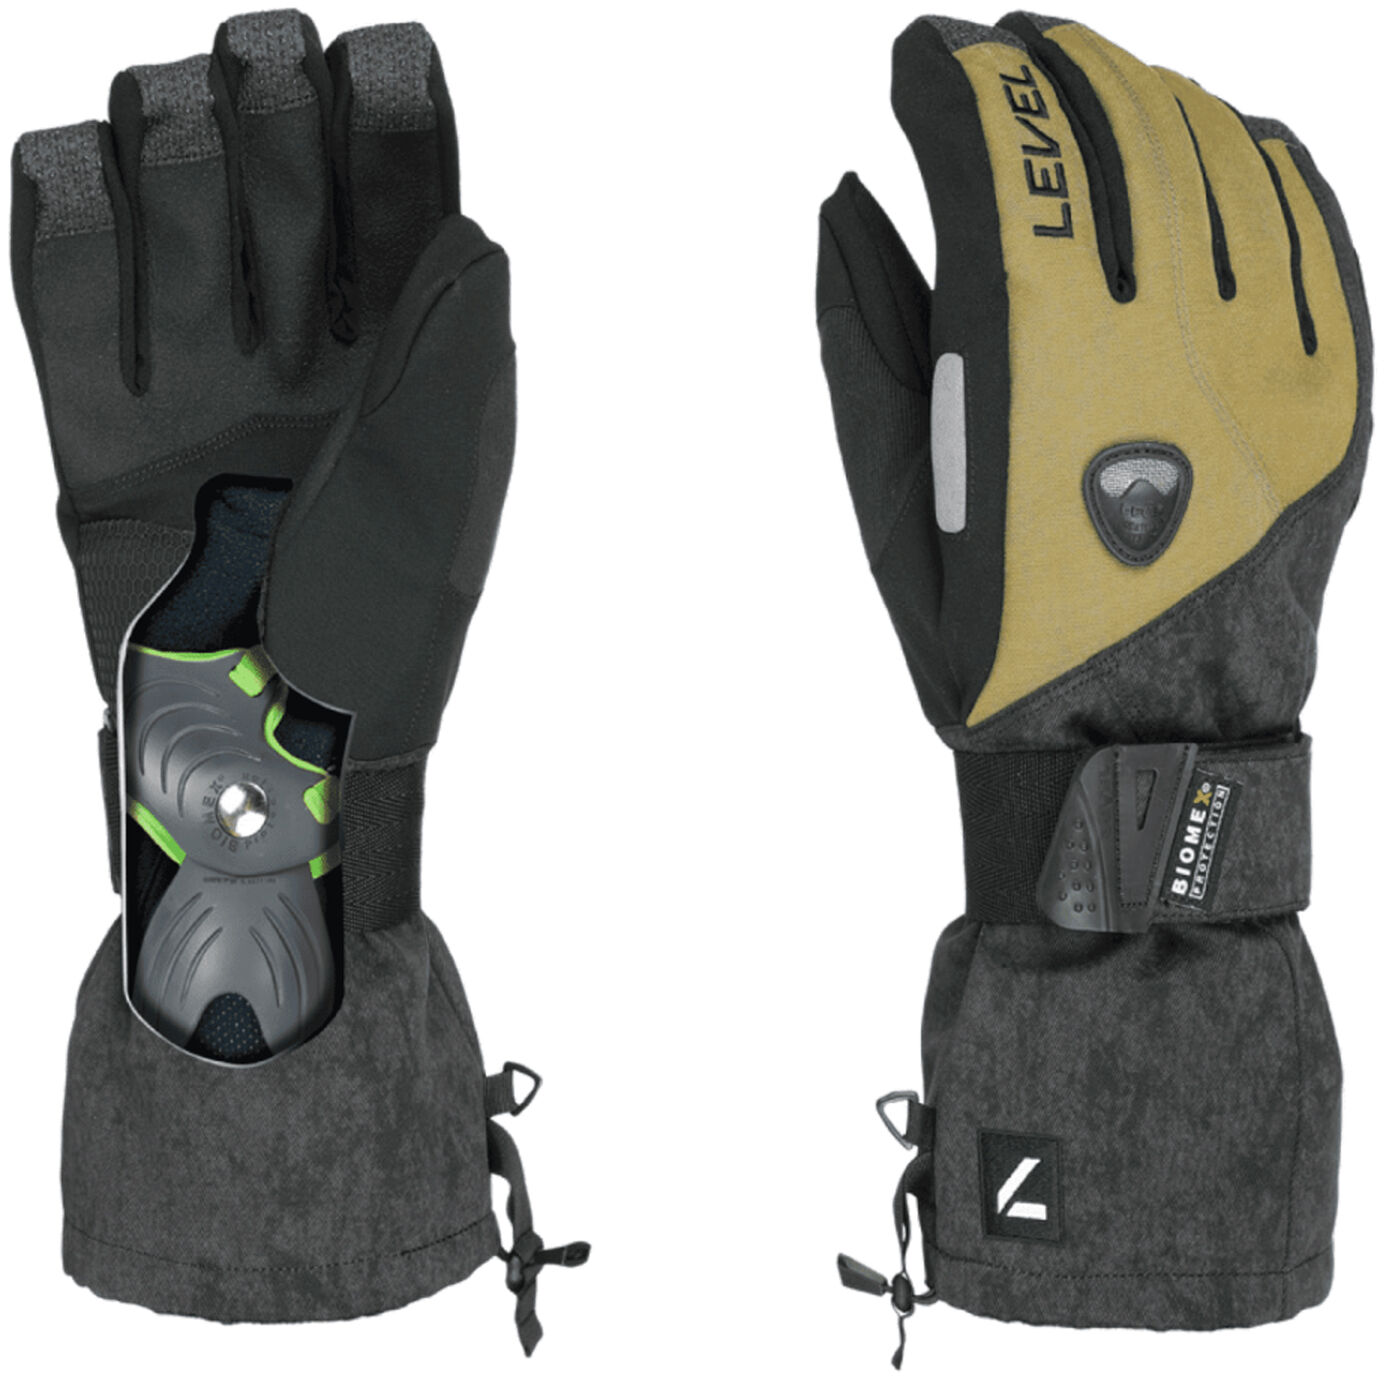 LEVEL FLY GLOVE OLIVE S-M